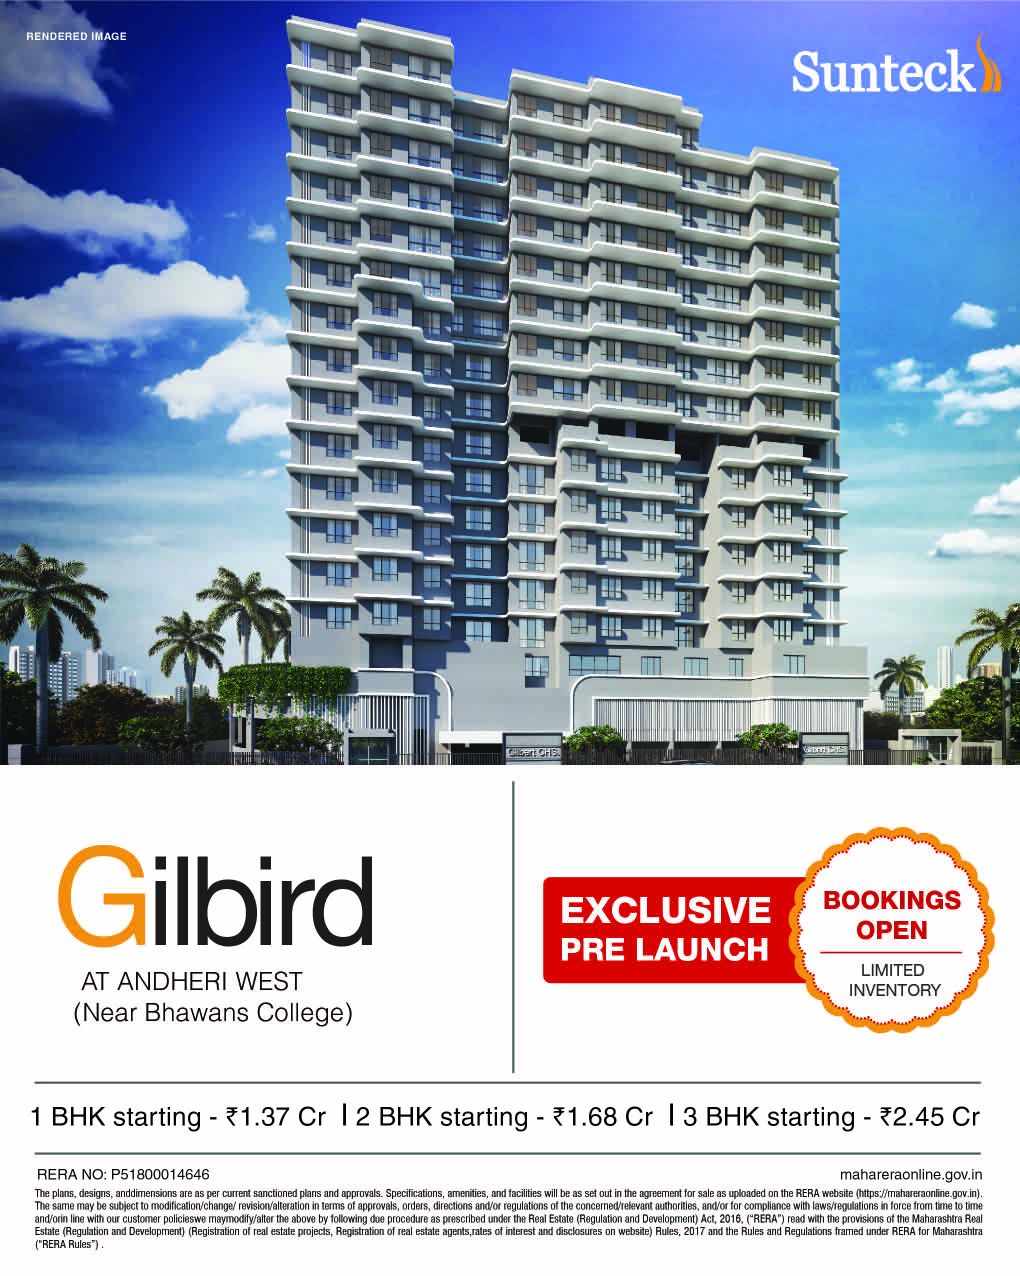 Sunteck Gilbird - New Launch Project by Sunteck Realty in Andheri West, Mumbai